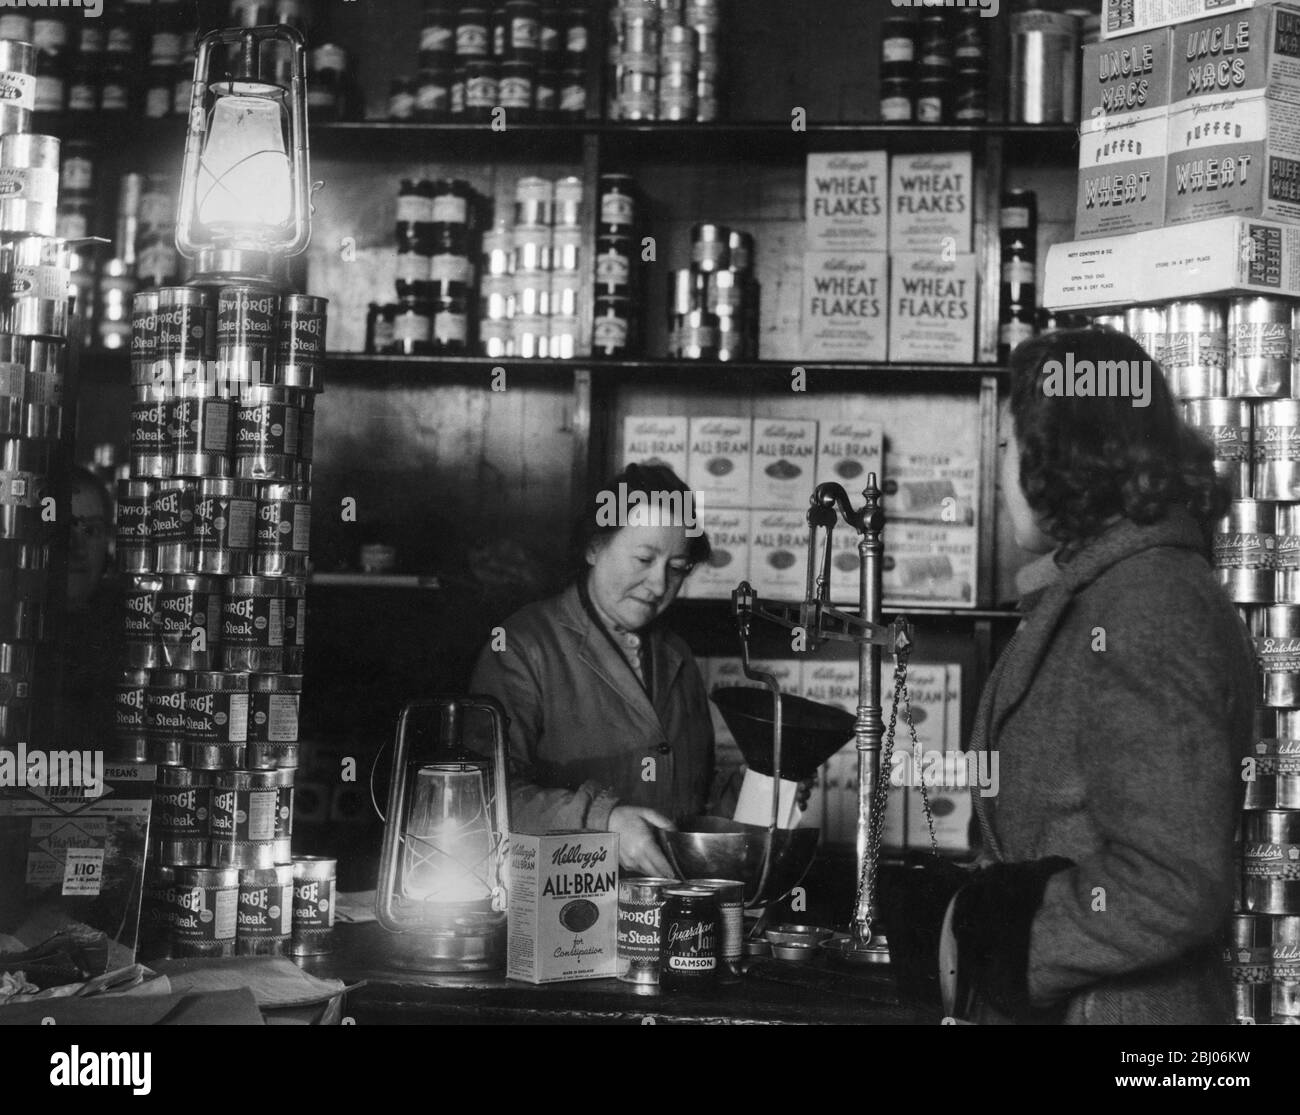 Fuel crisis of 1947: - London offices and shops, when the lights went off as a result of the electricity cuts, carried on with varying types of illumination. Photo shows shopping by the light of hurricane lamps in a grocer's store in Blackfriars, London. E.C. on 10th February 1947. - Stock Photo